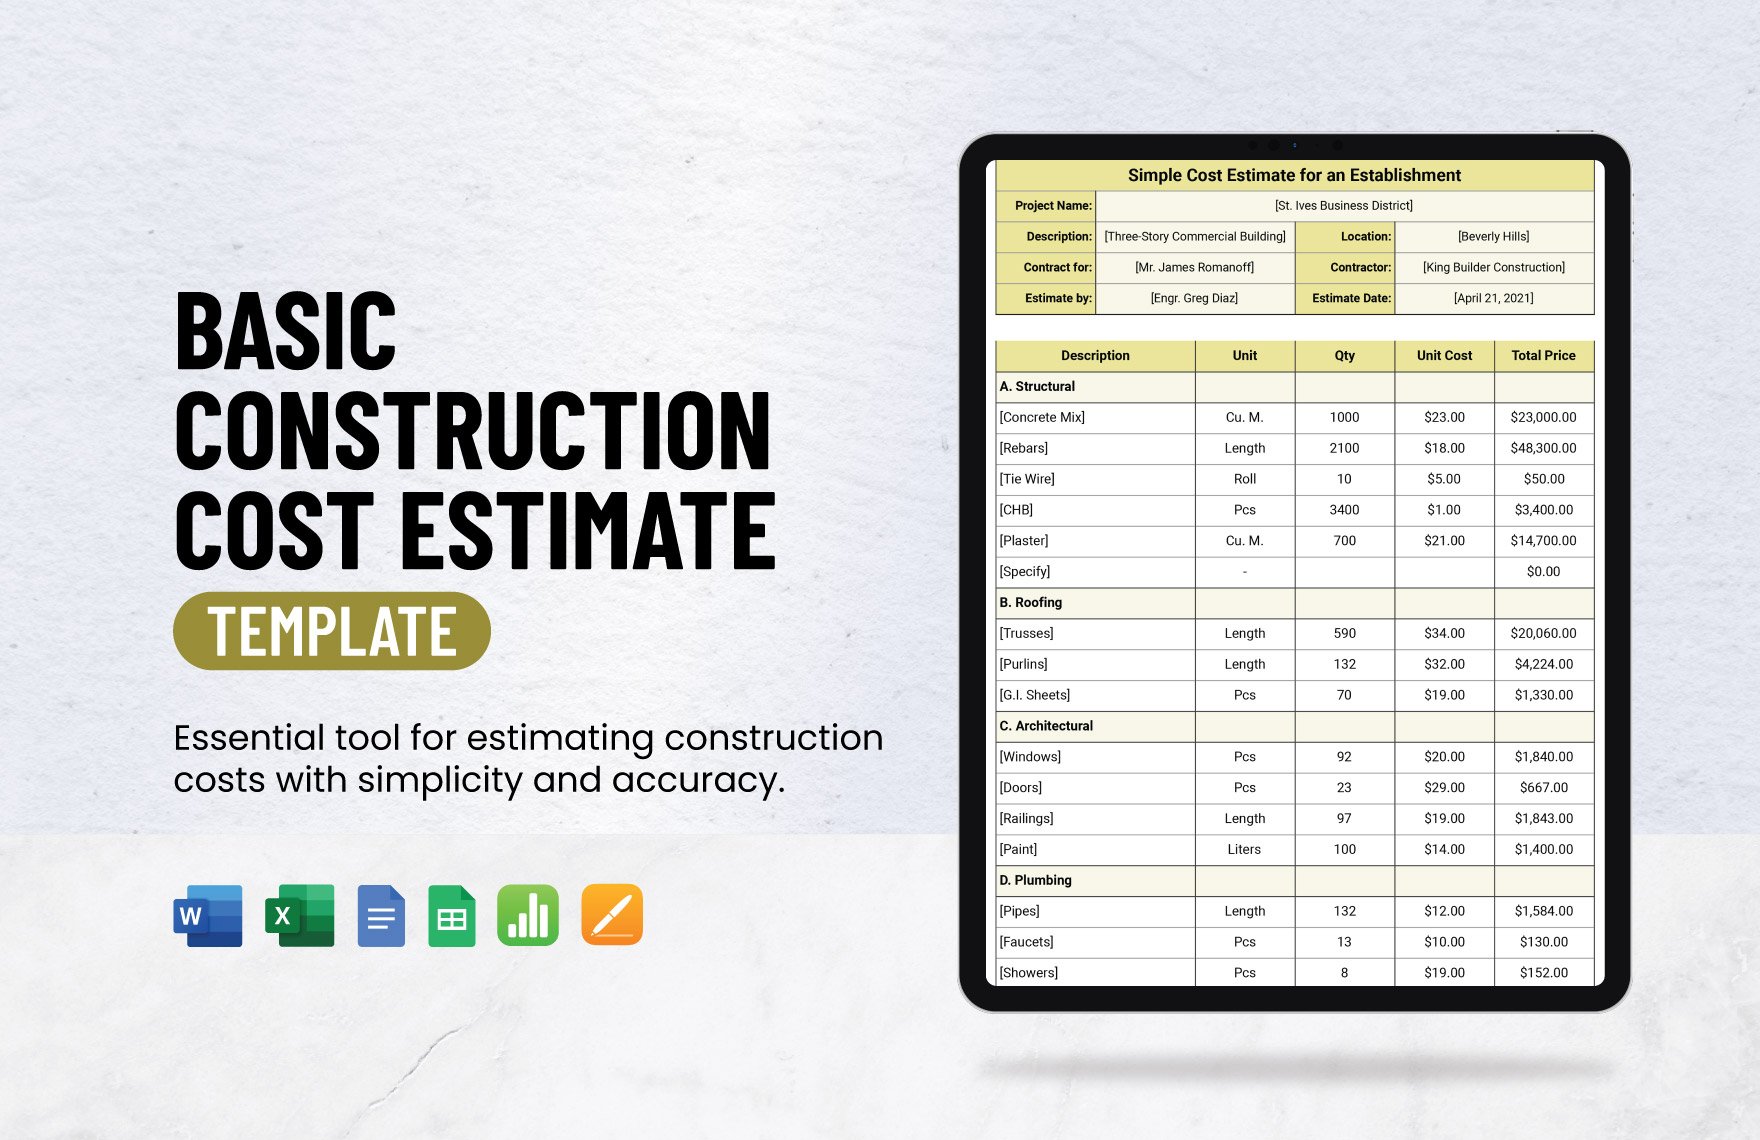 Basic Construction Cost Estimate Template in Word, Google Docs, Excel, Google Sheets, Apple Pages, Apple Numbers